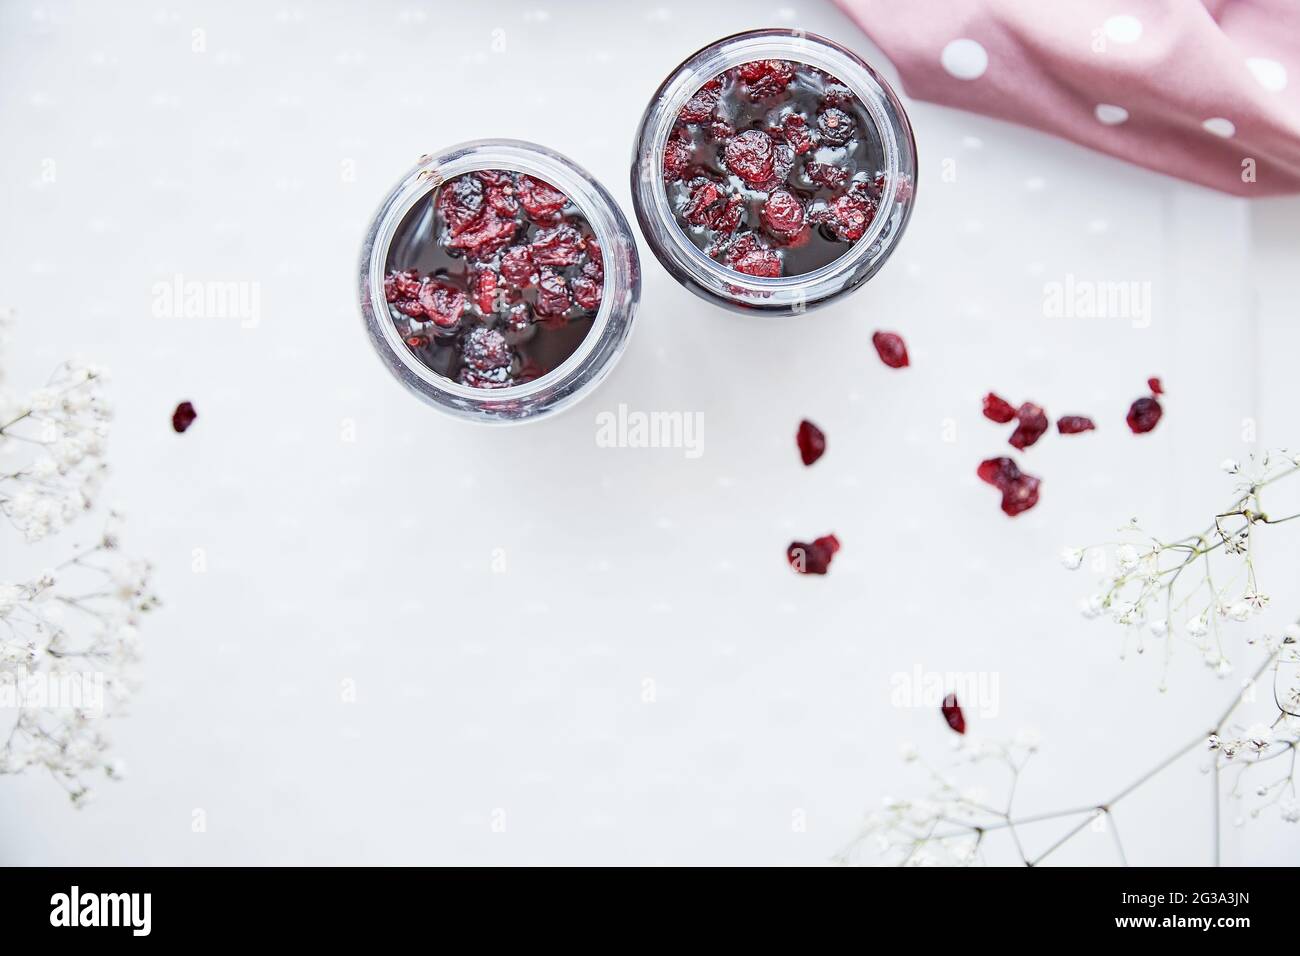 Healthy fermented honey product with cranberry. Food preservative at home, cozy, rustic flat lay. Delicious recipe concept. Anti-viral food. anti-bacterial, anti-viral product. Top view with copy Stock Photo